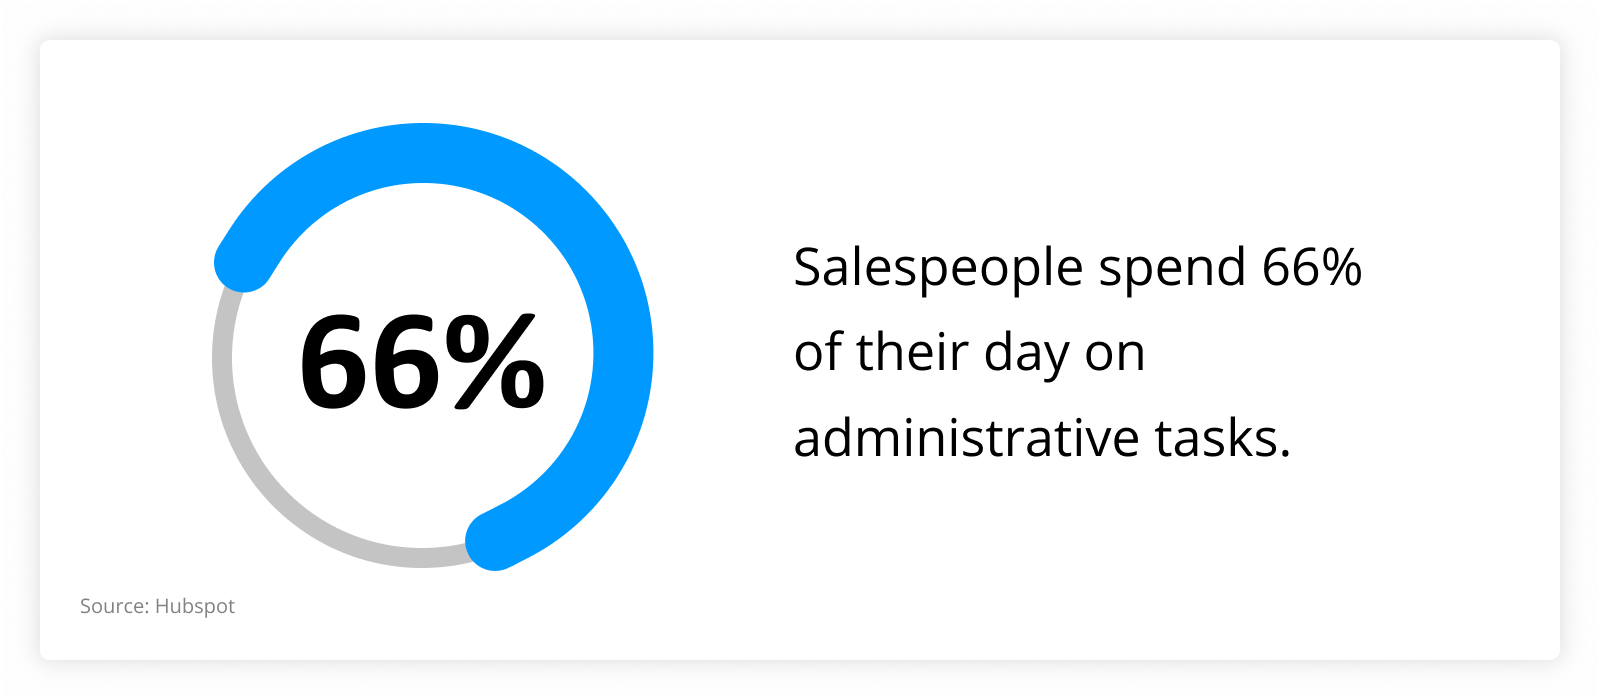 graph showing that Salespeople spend 66% of their day on administrative tasks.